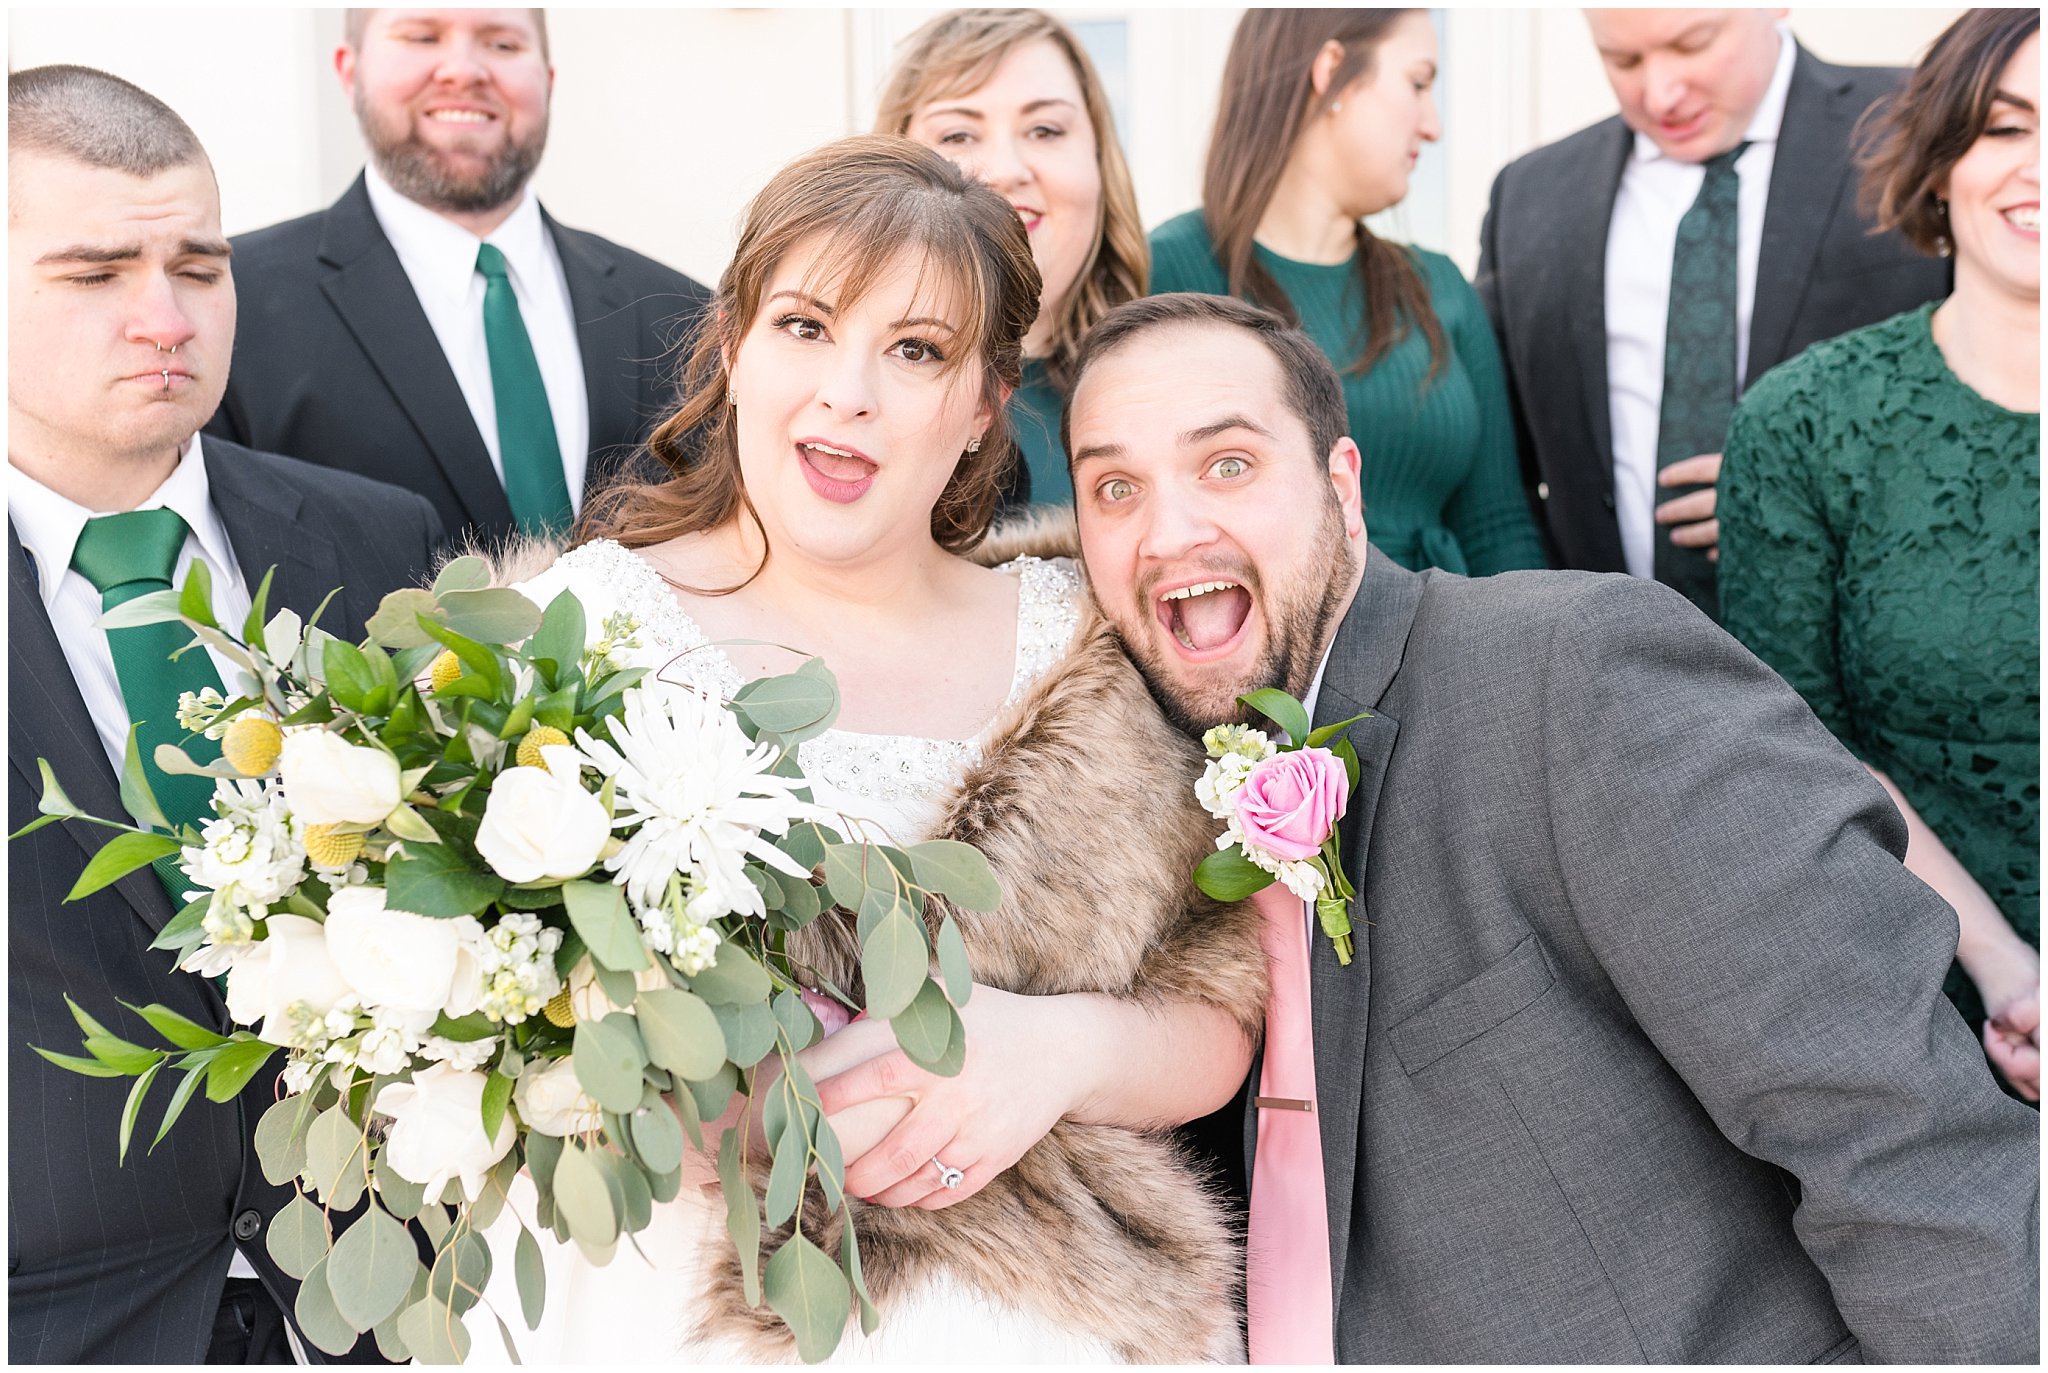 Bride and groom making goofy faces during fun wedding at the Ogden Temple in the winter | Top Utah Wedding and Couples Photos 2019 | Jessie and Dallin Photography